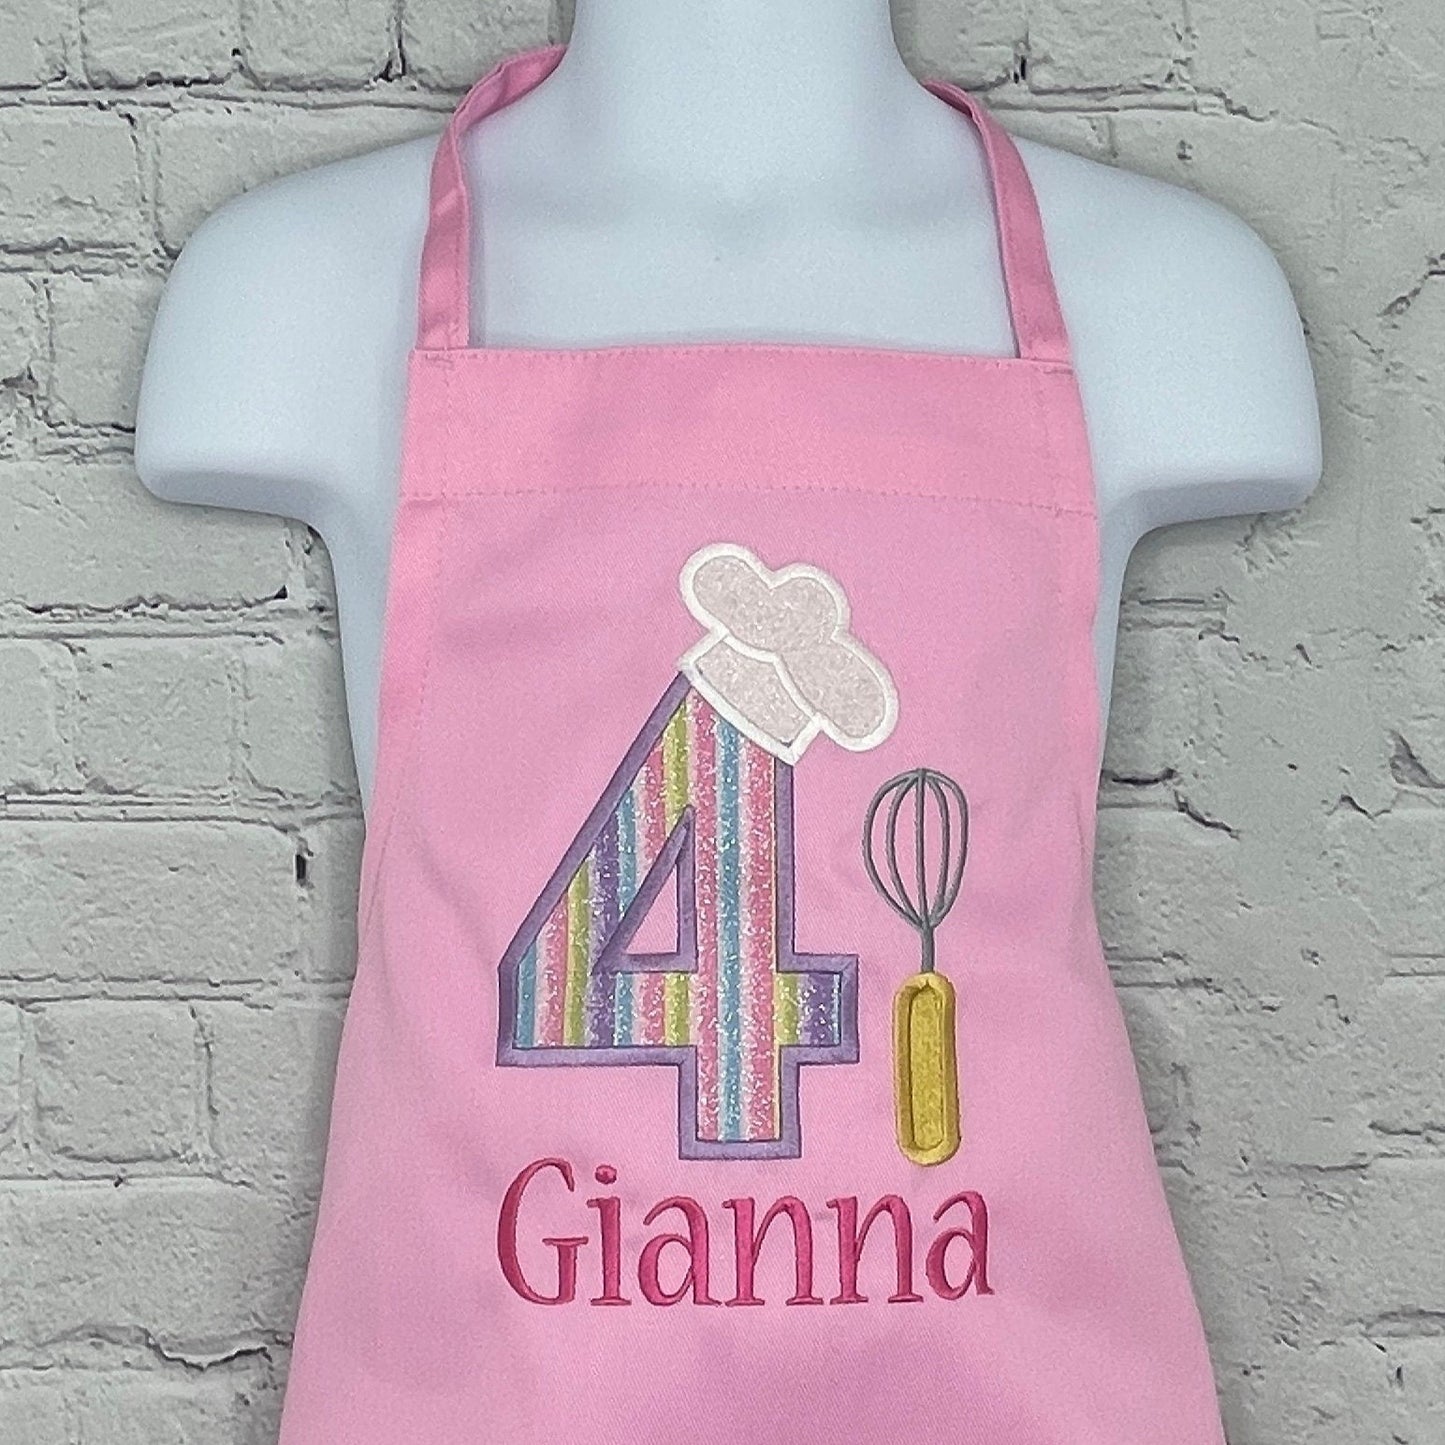 Party Pack of 7 Personalized Kids Embroidered Aprons for Cooking or Baking Party